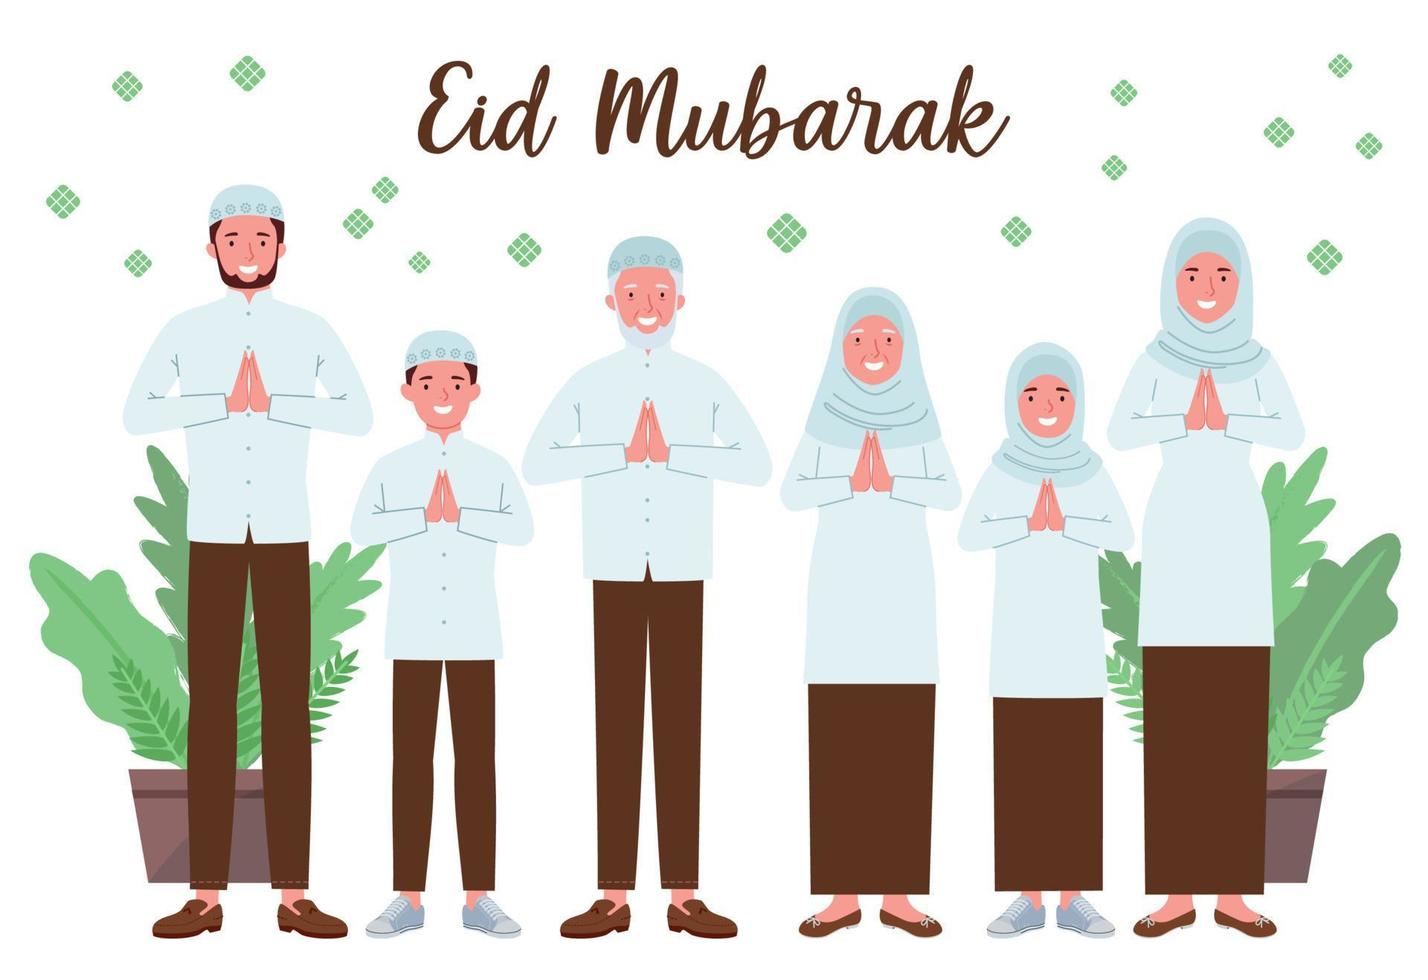 Muslim families consisting of grandfathers, grandmothers, parents and their children, wish you a happy Eid Mubarak. vector